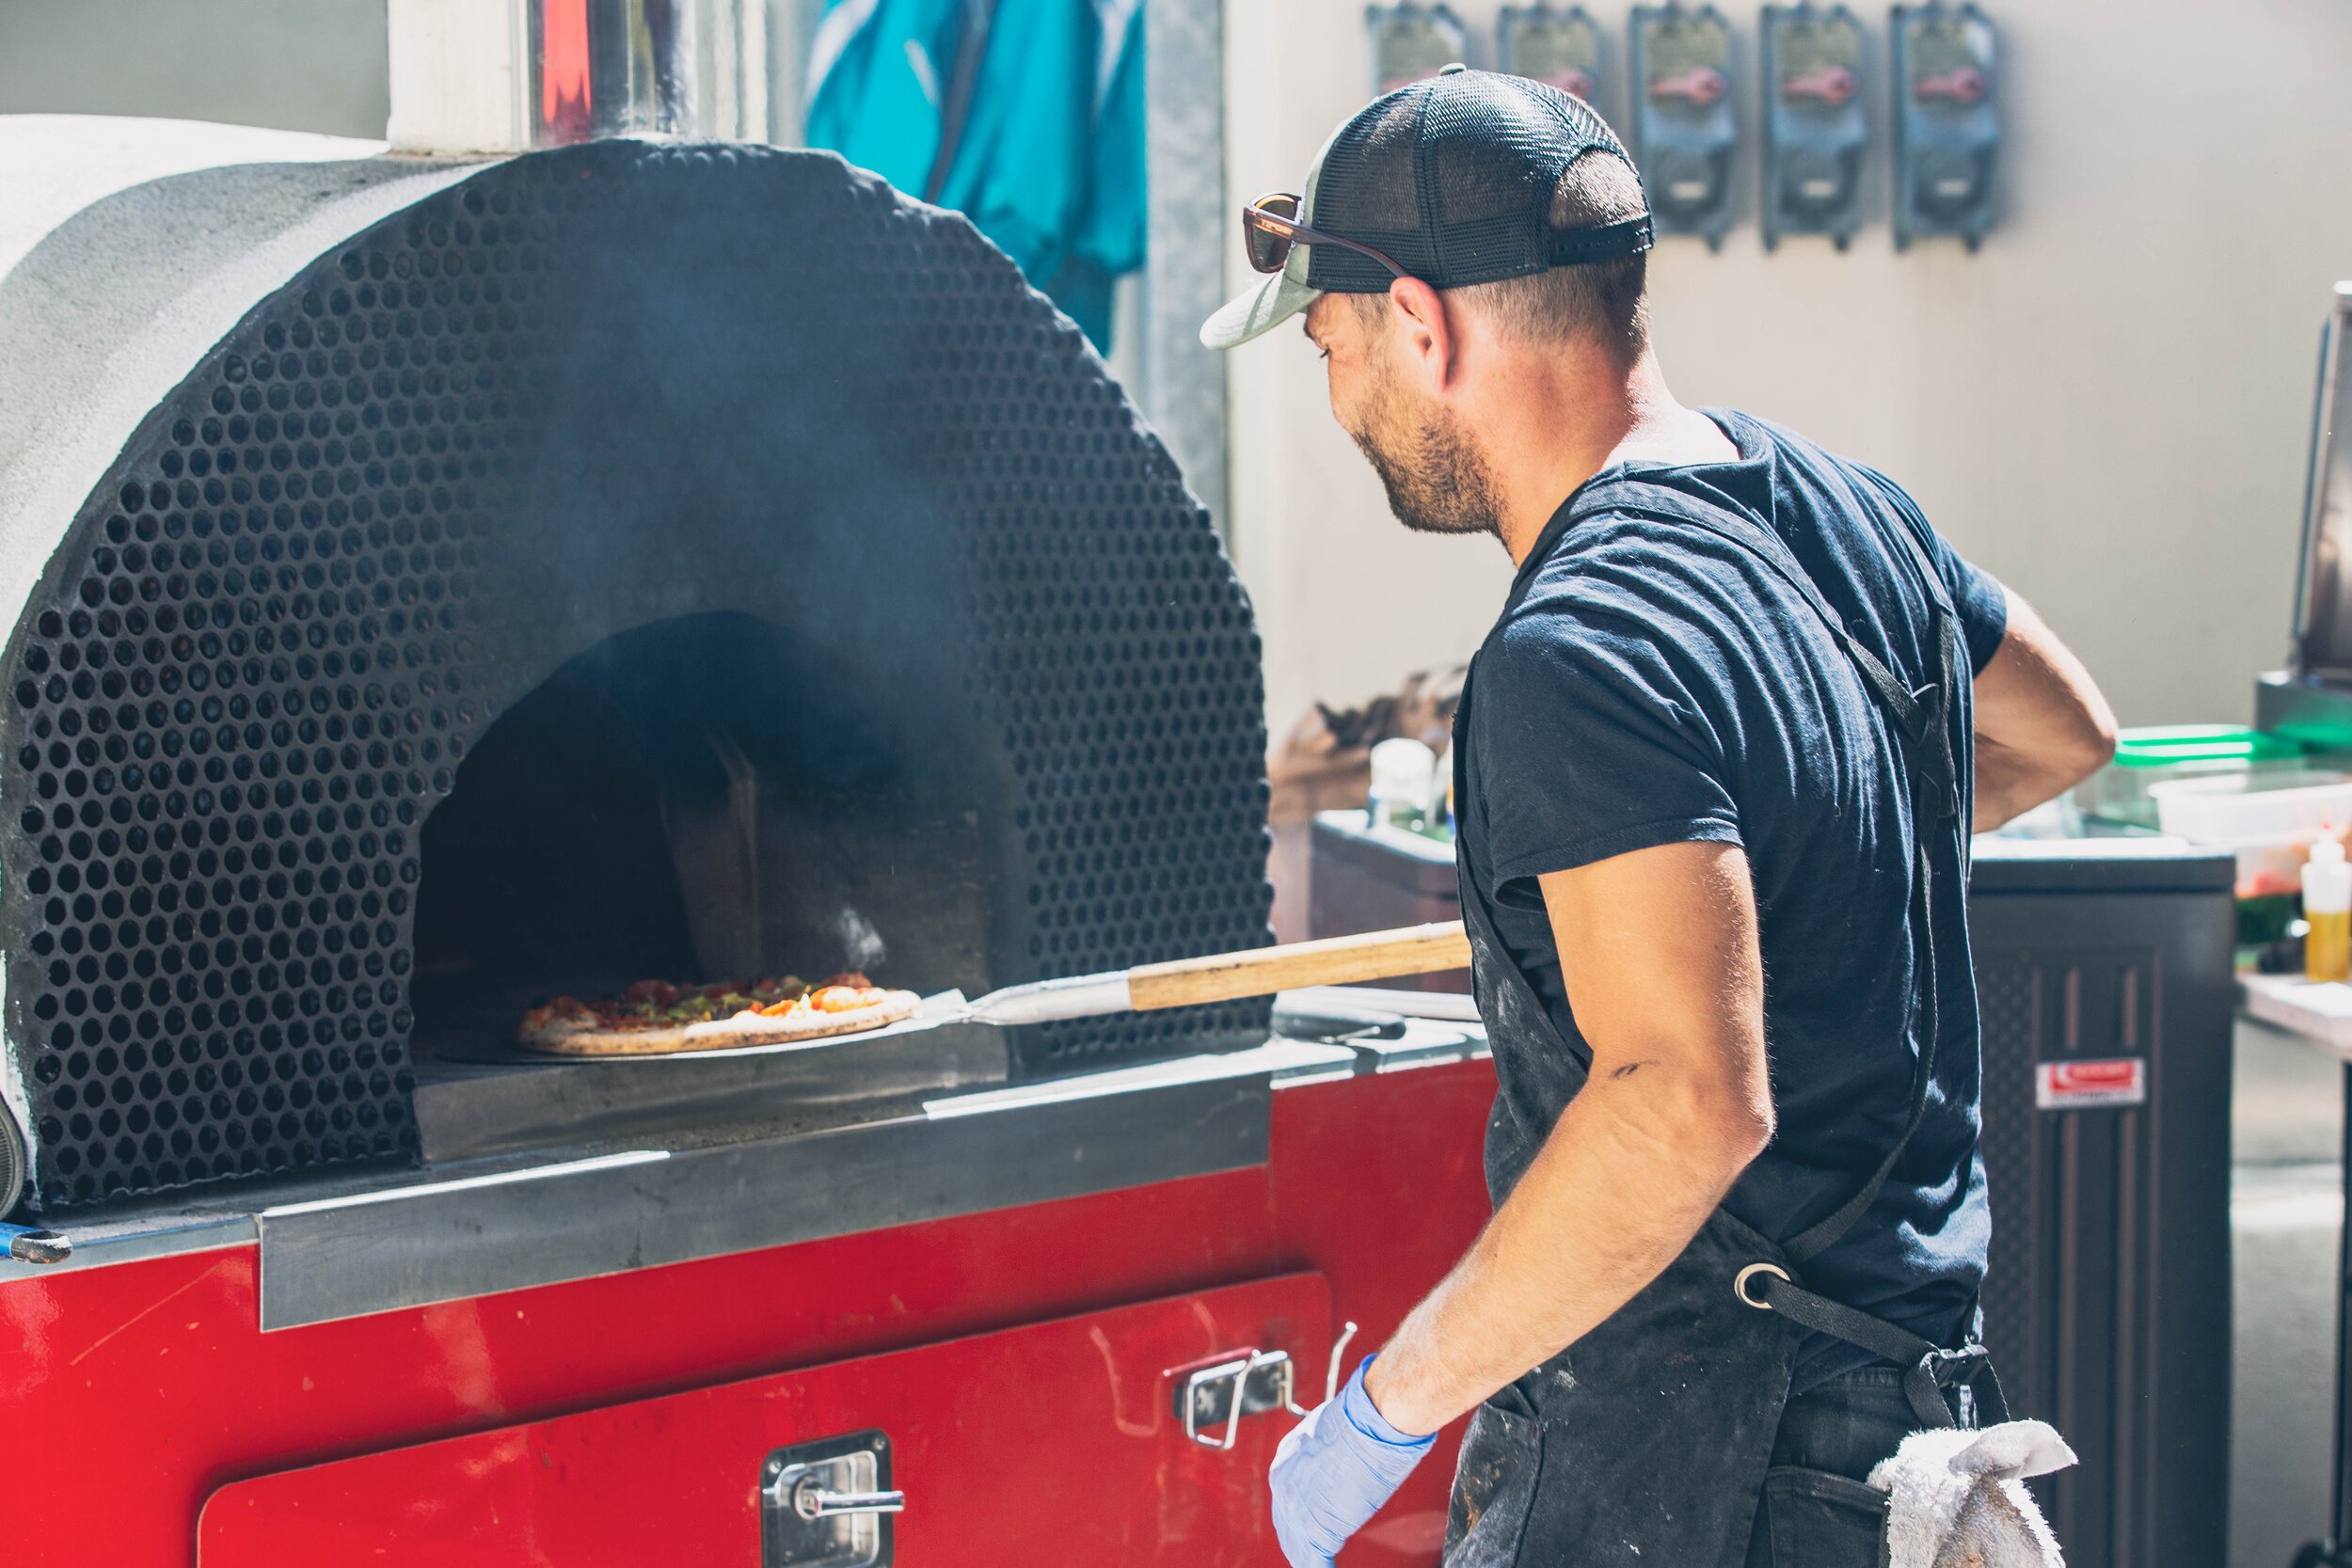 www.santabarawedding.com | Firefly Pizza Company | Putting Pizzas in the Wood Fire Oven